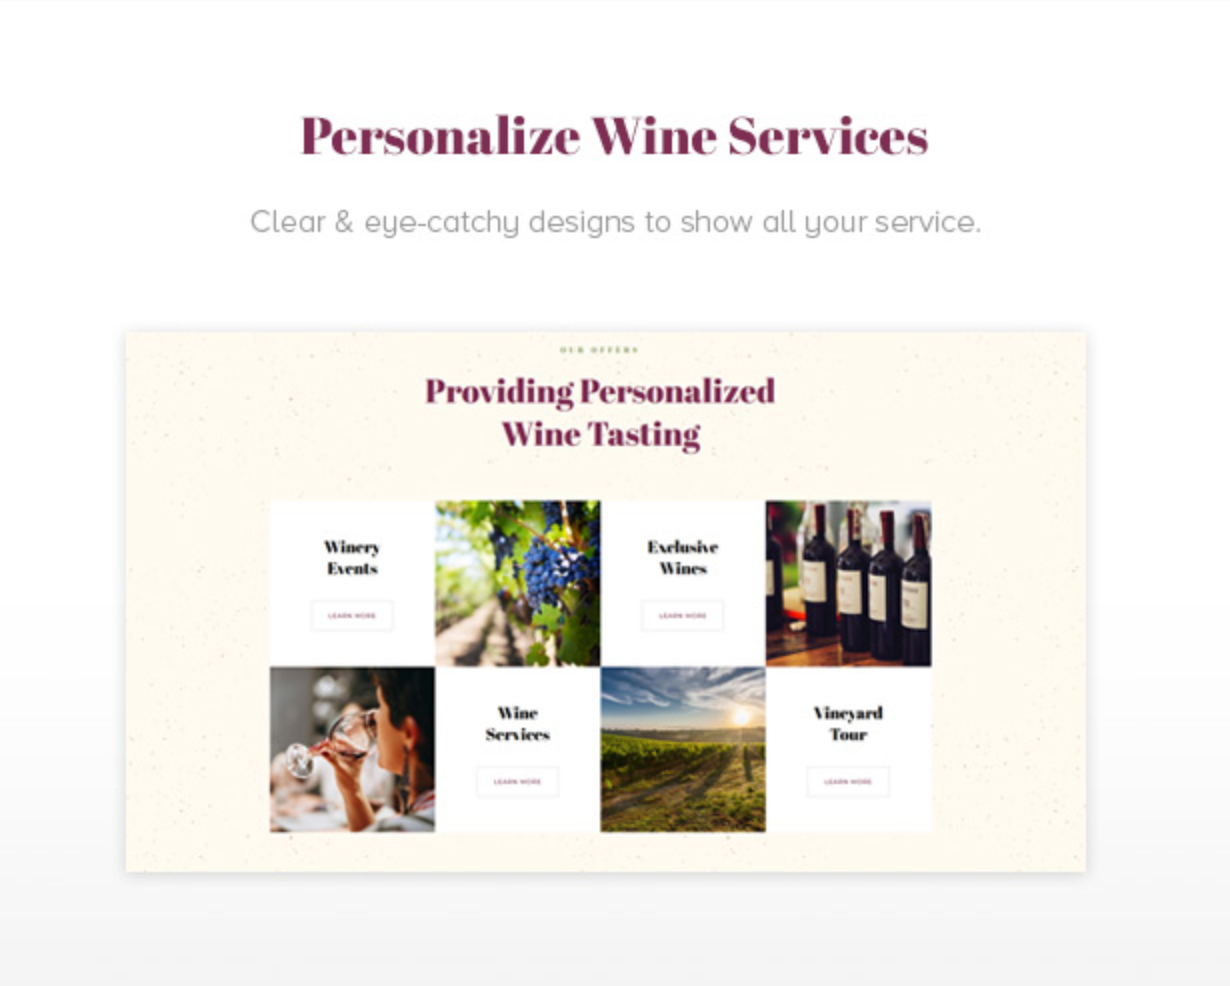 Royanwine Personalized Wine Services for Vinyard, Winery, Wine Makers, Dairy Farm